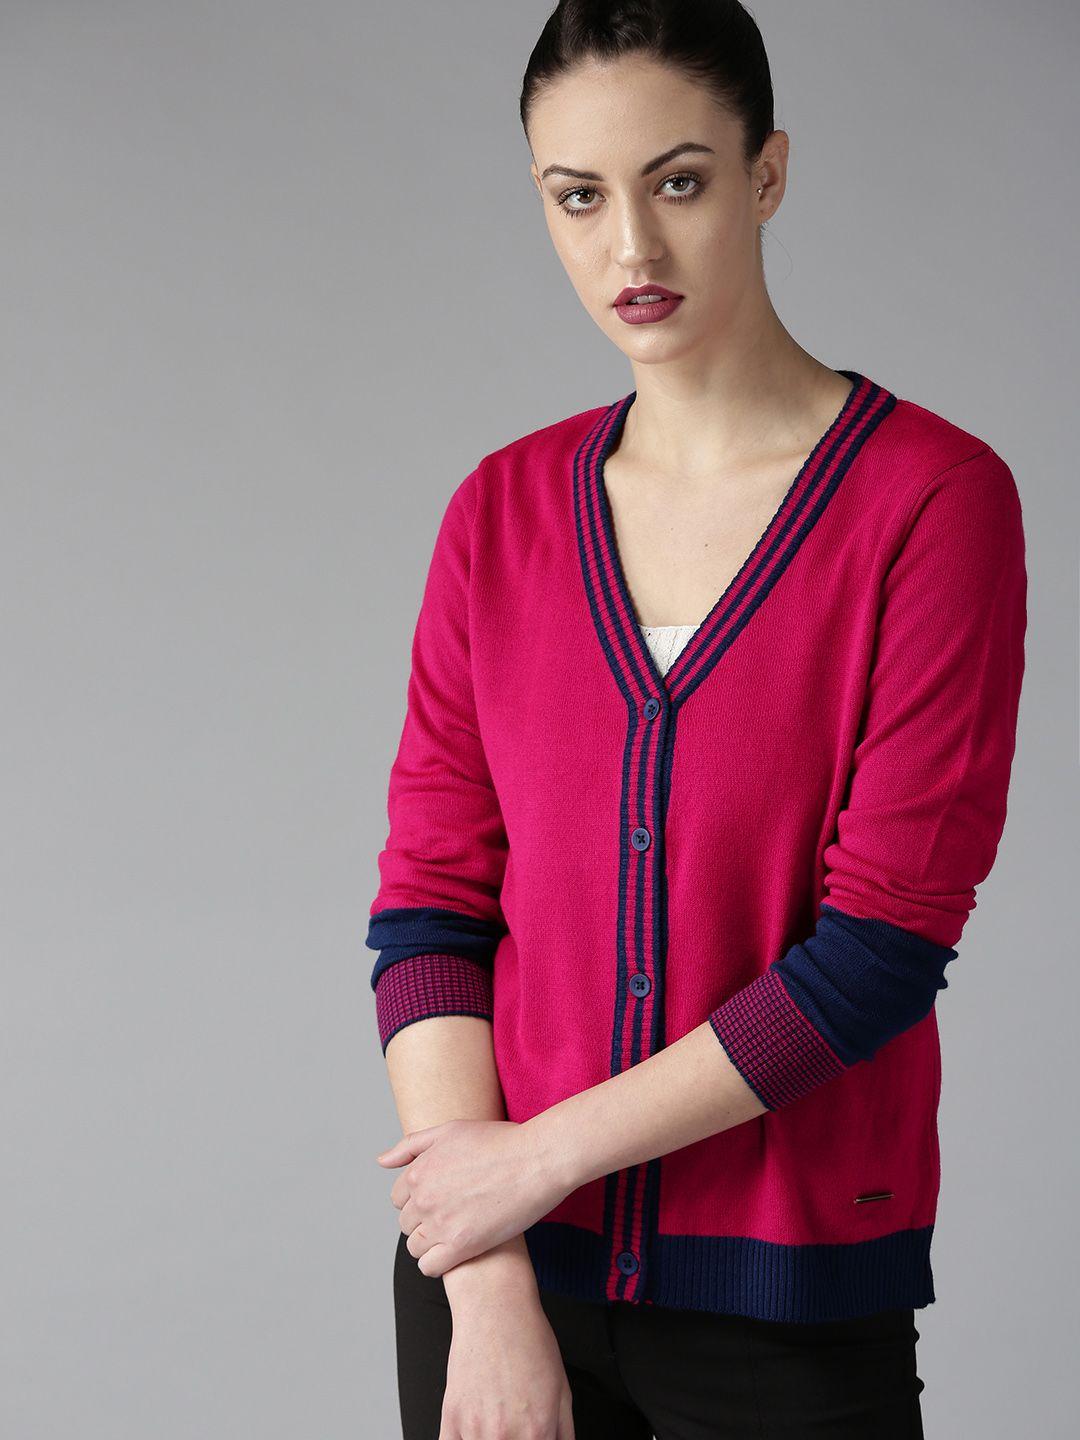 The Roadster Lifestyle Co Women Pink Solid Cardigan